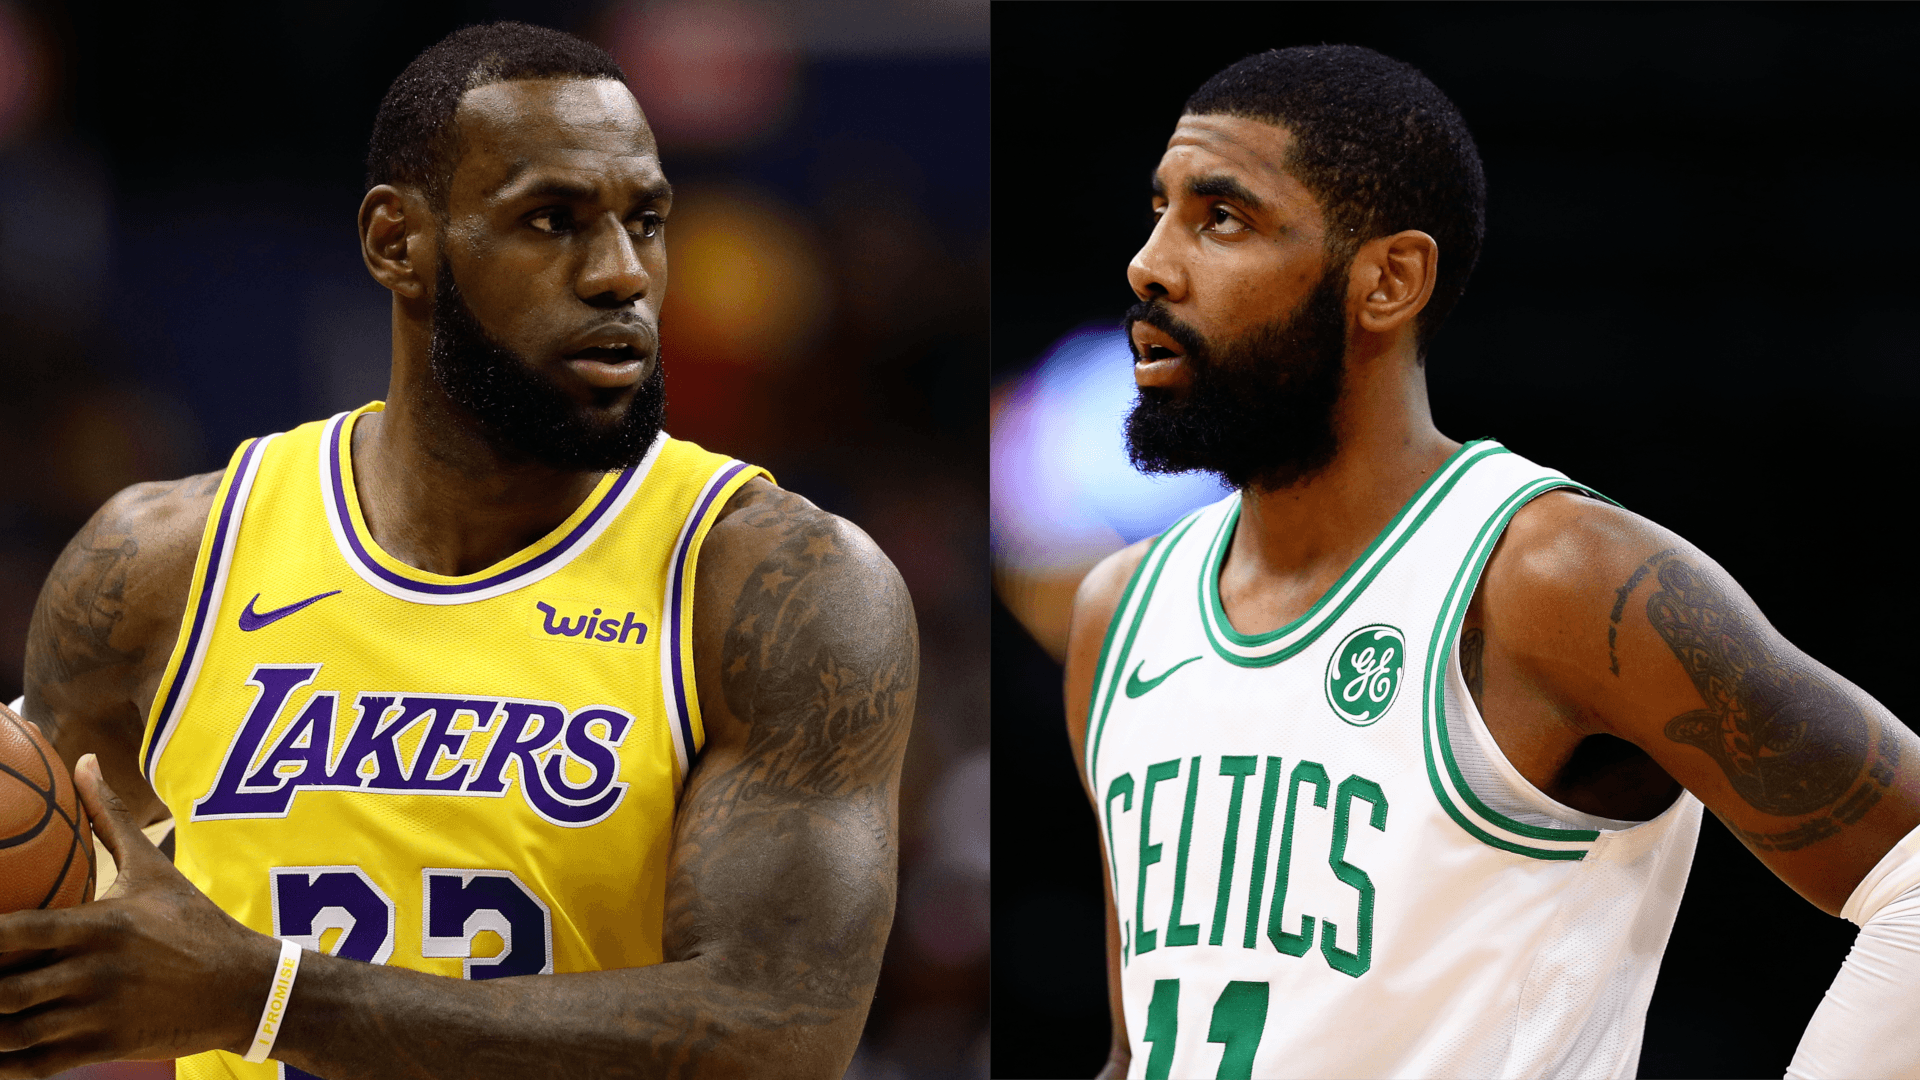 Do Lakers or Celtics have bigger drama issues?